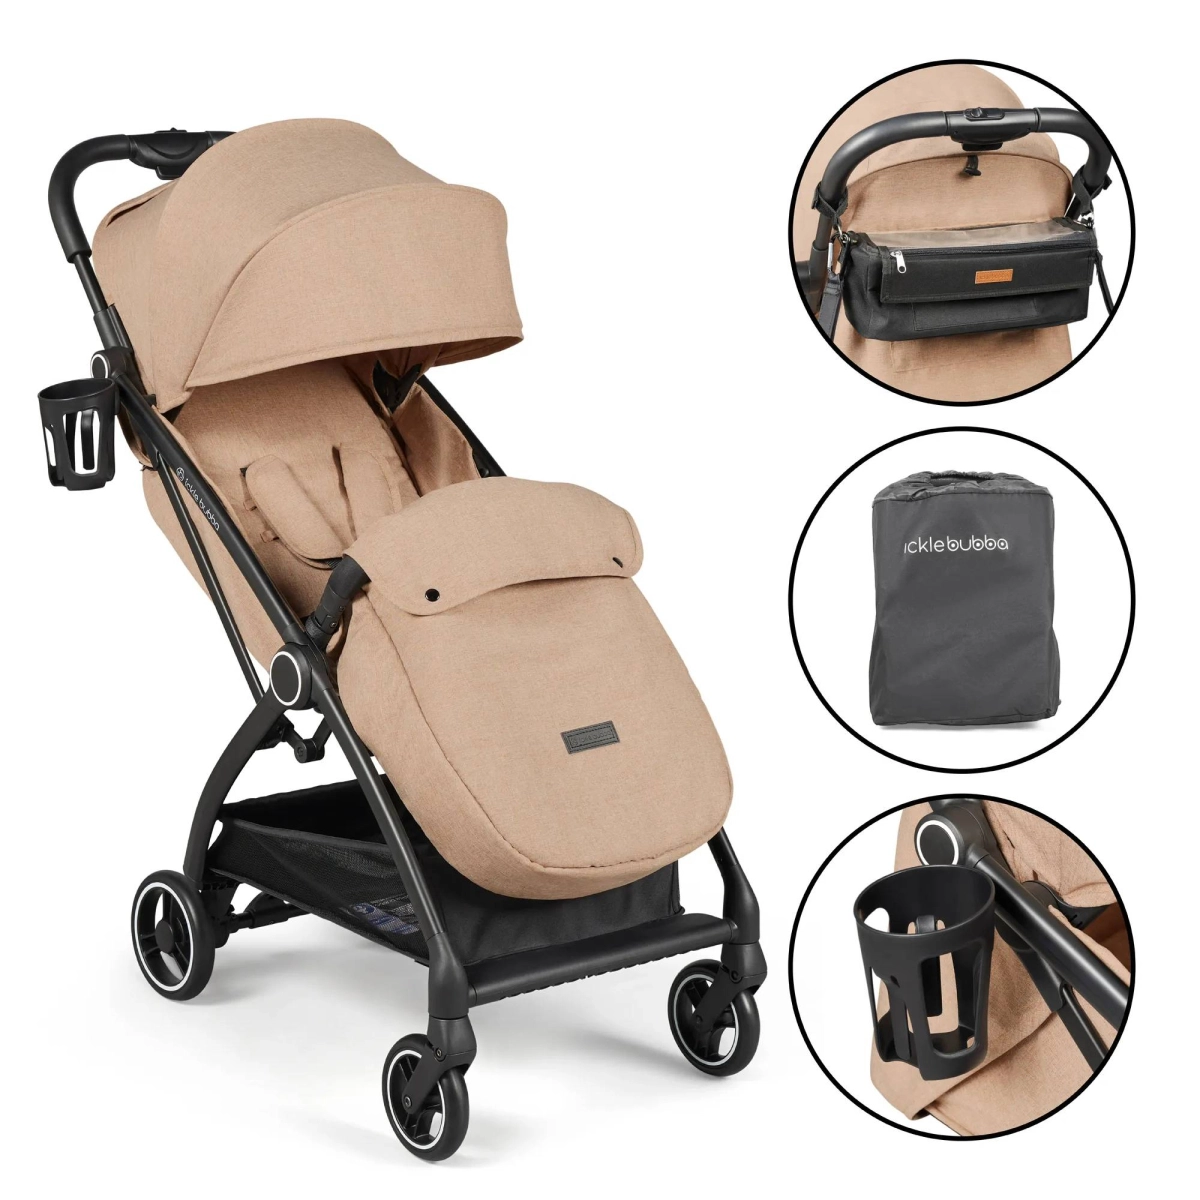 Ickle Bubba Aries Prime Autofold Stroller